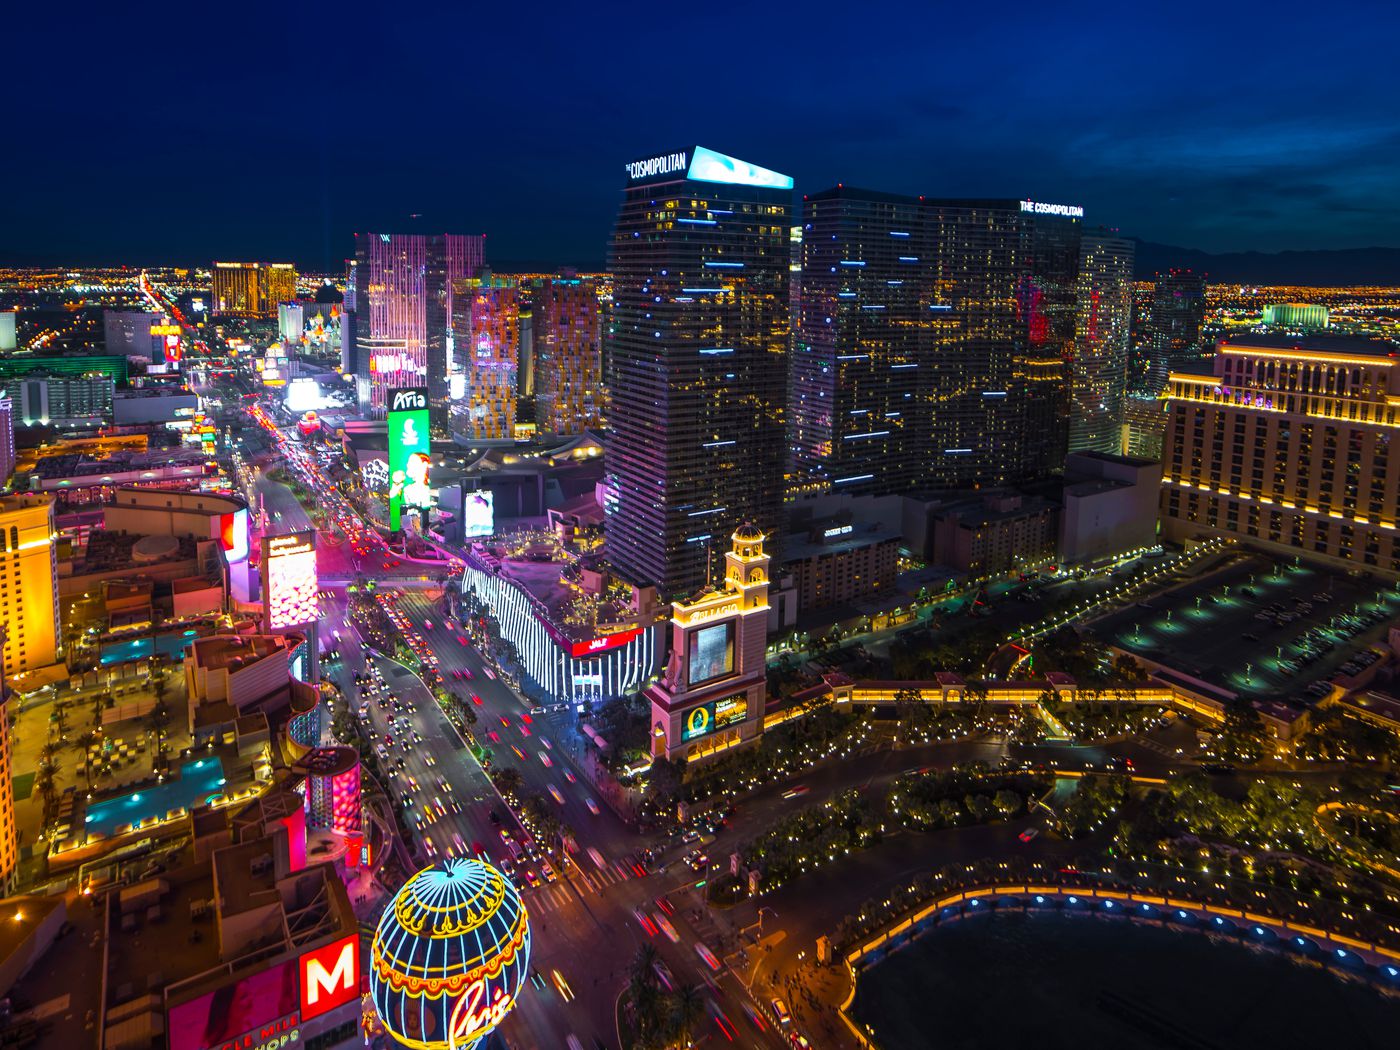 Las Vegas Strip Rated One Of Most Photographed Roads In US